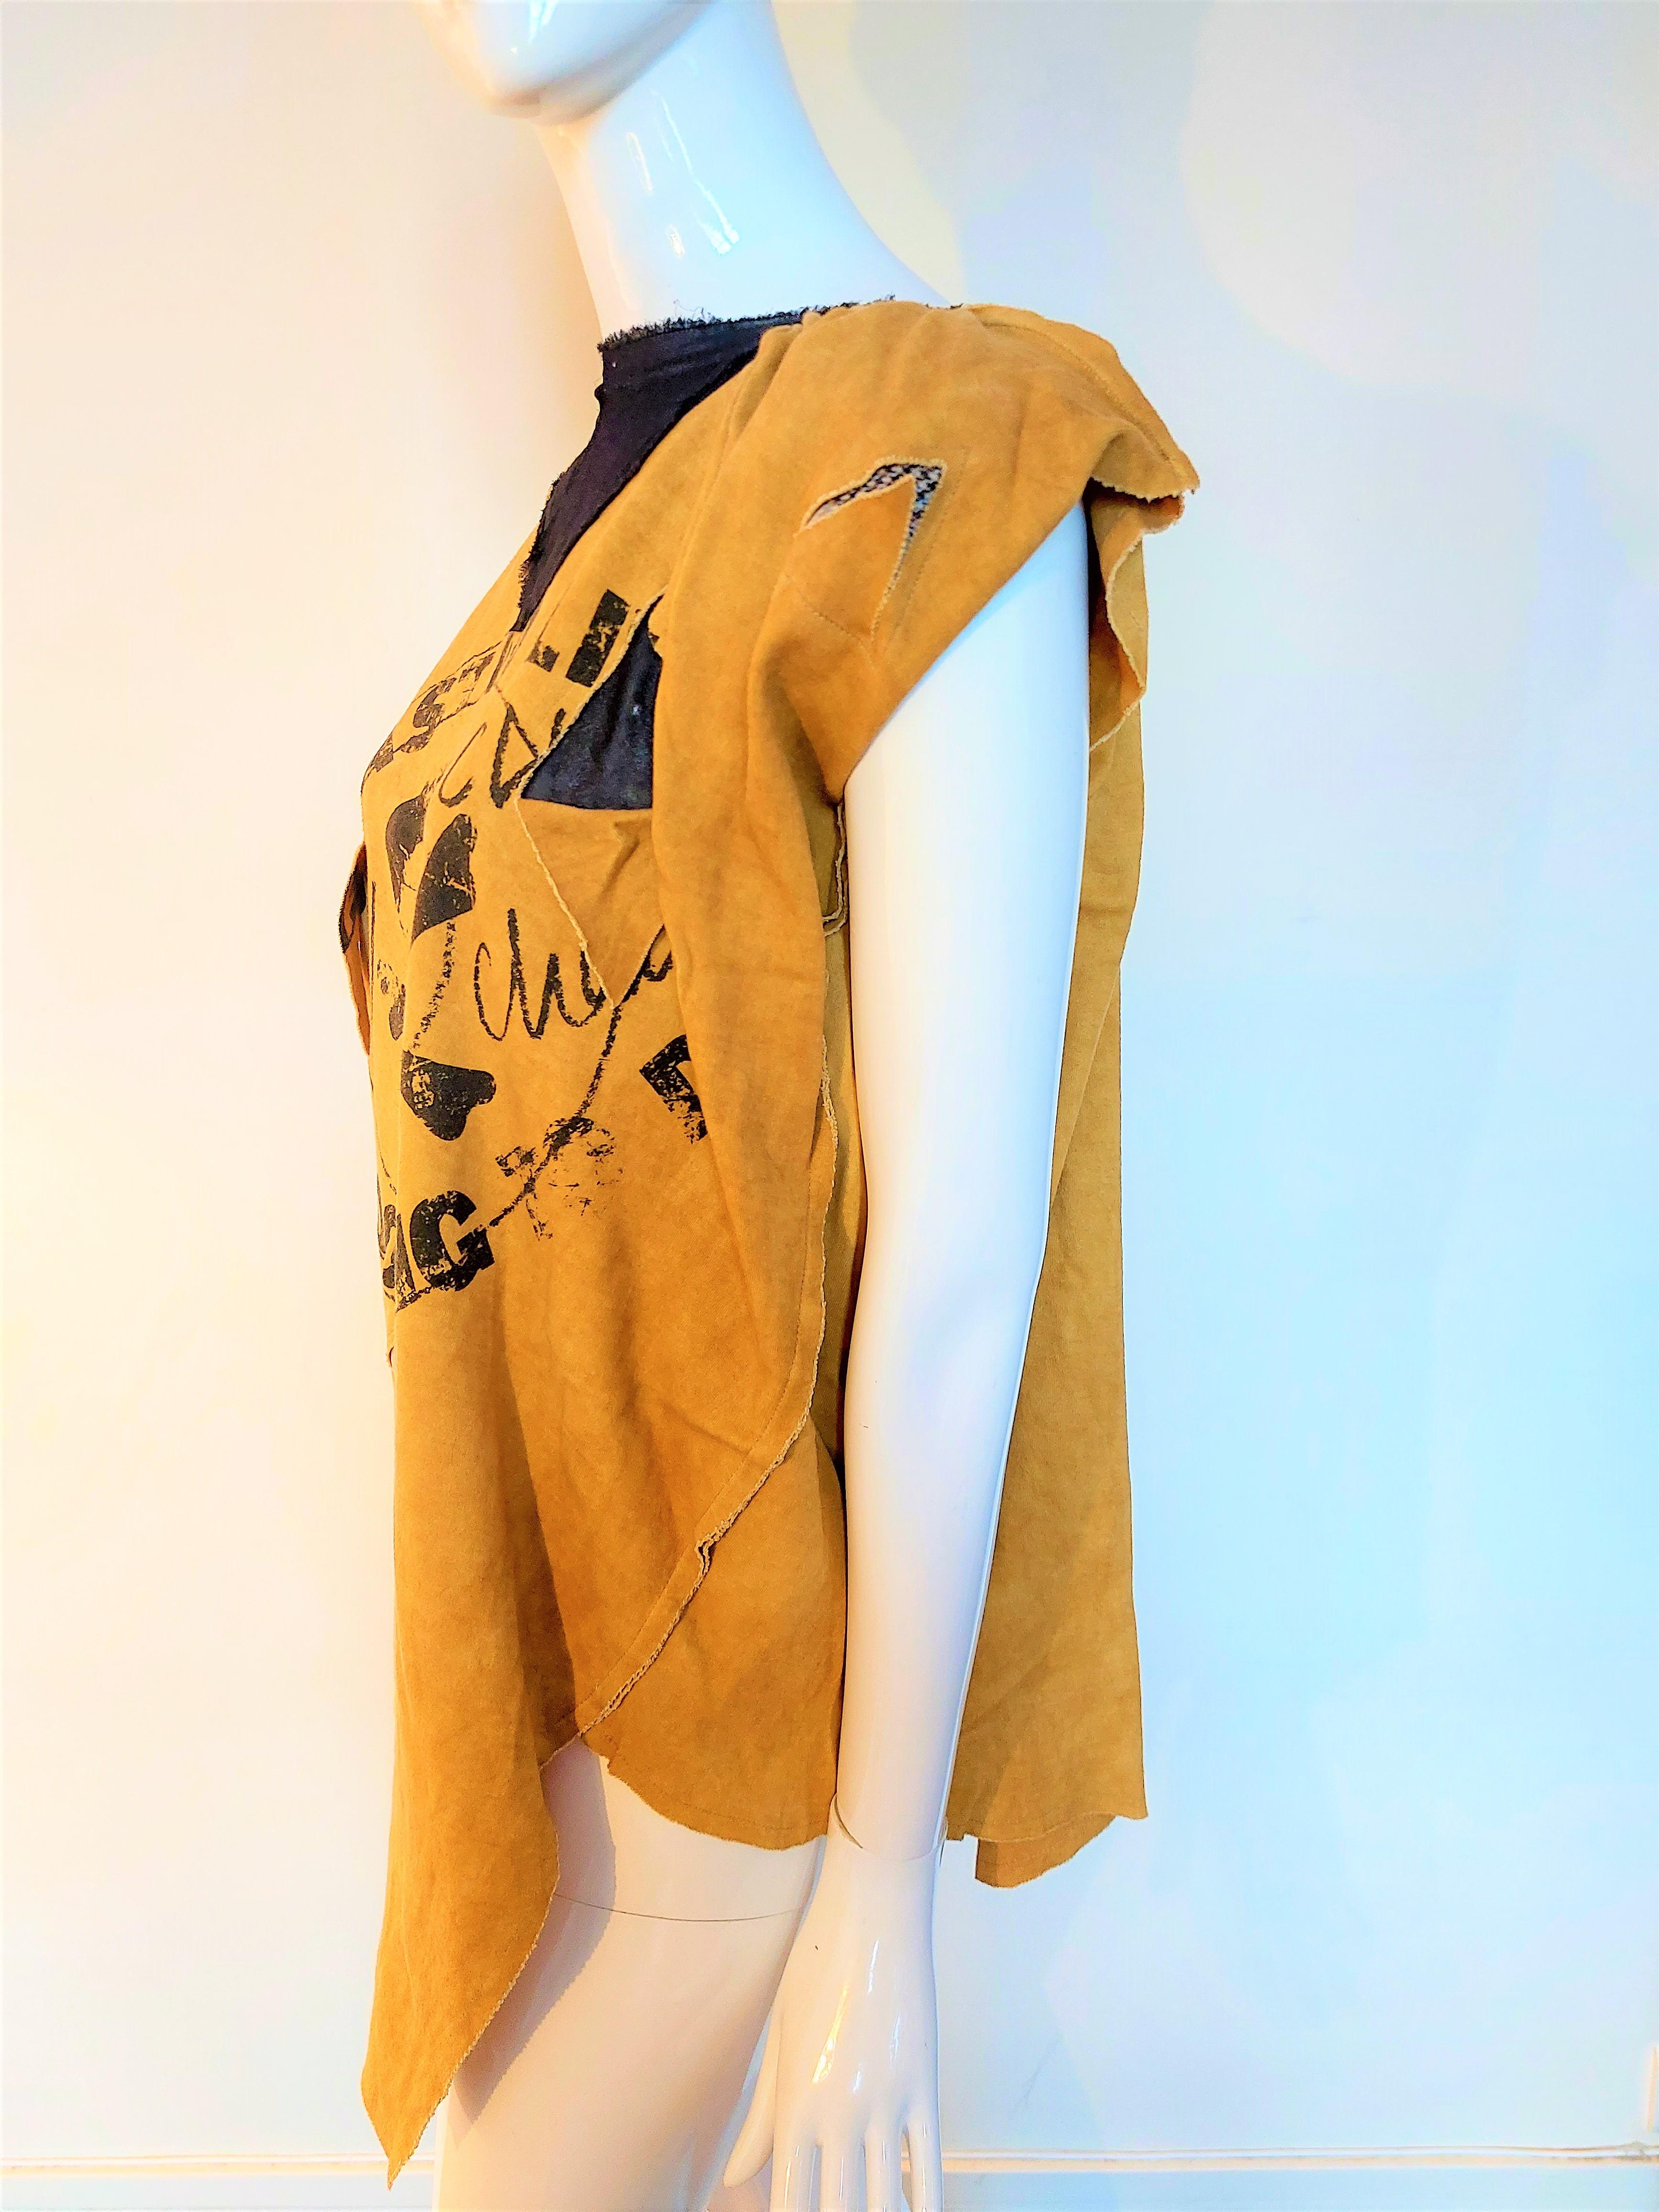 Vivienne Westwood Skull ’Too fast To Live Too Young to Die’ Punk Rock Dress Top 9